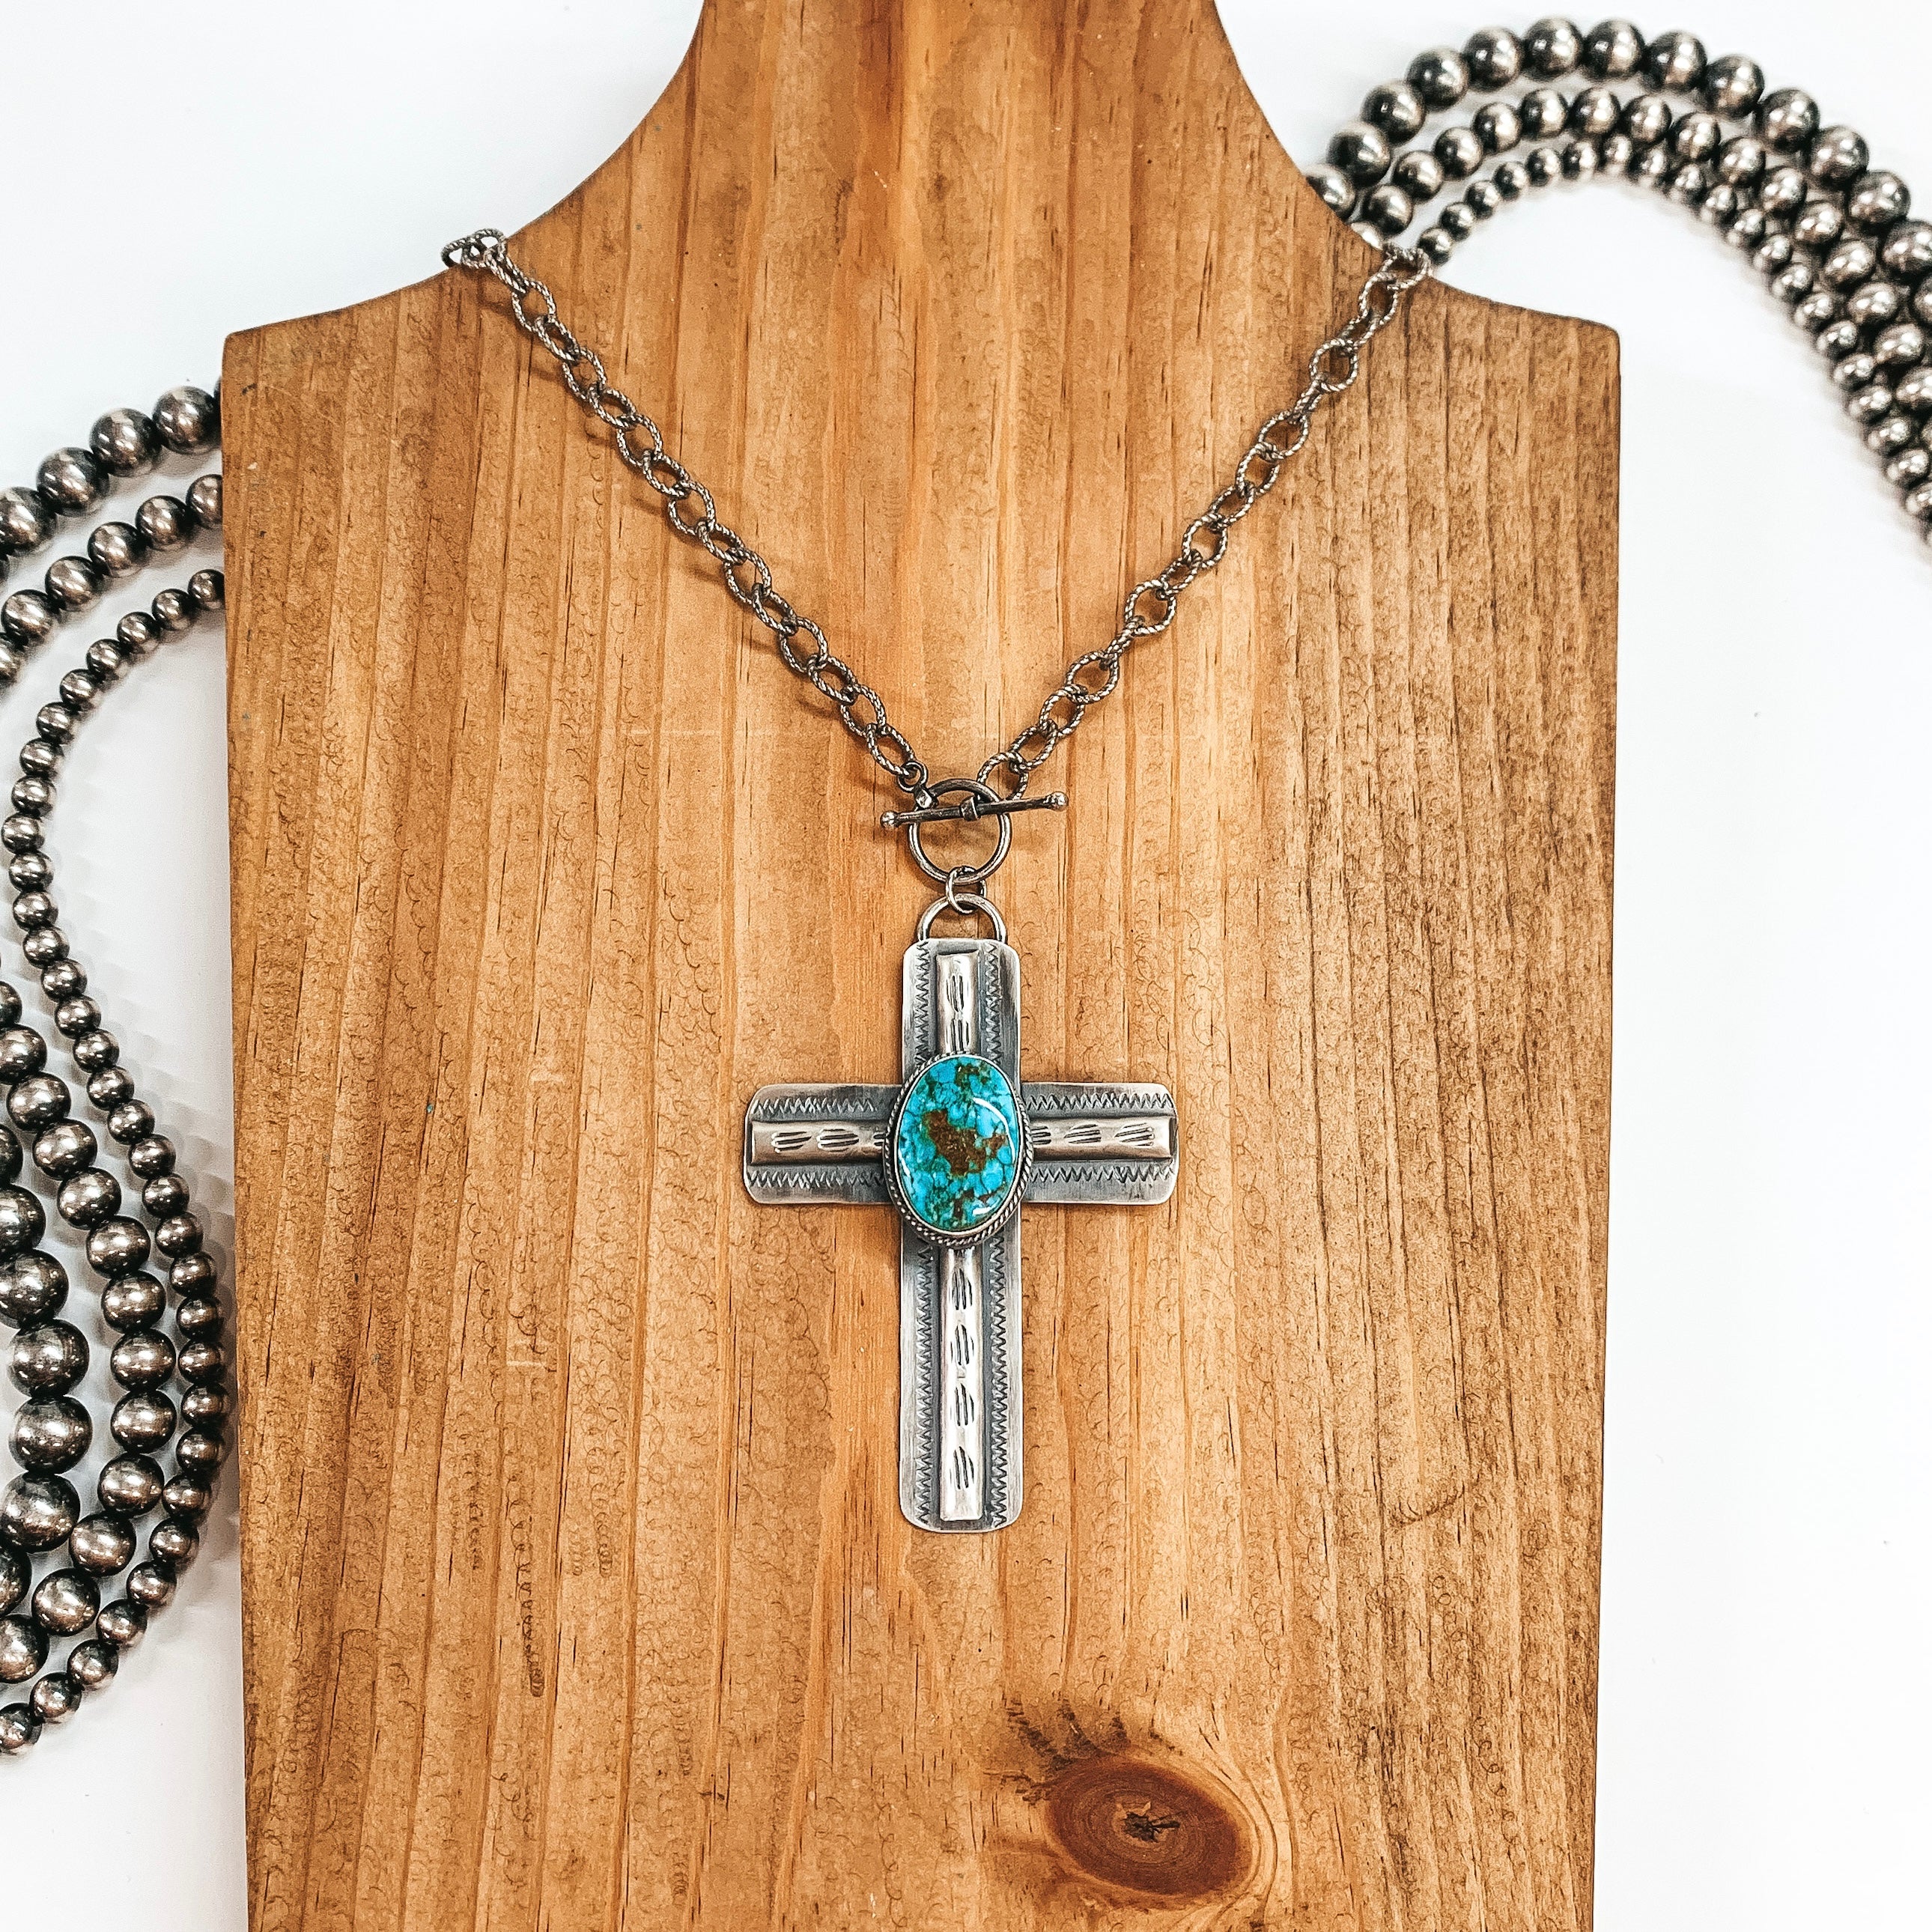 BS | Navajo Handmade Sterling Silver Chain Necklace and Cross Pendant with Turquoise Stone with Etched Detailing - Giddy Up Glamour Boutique